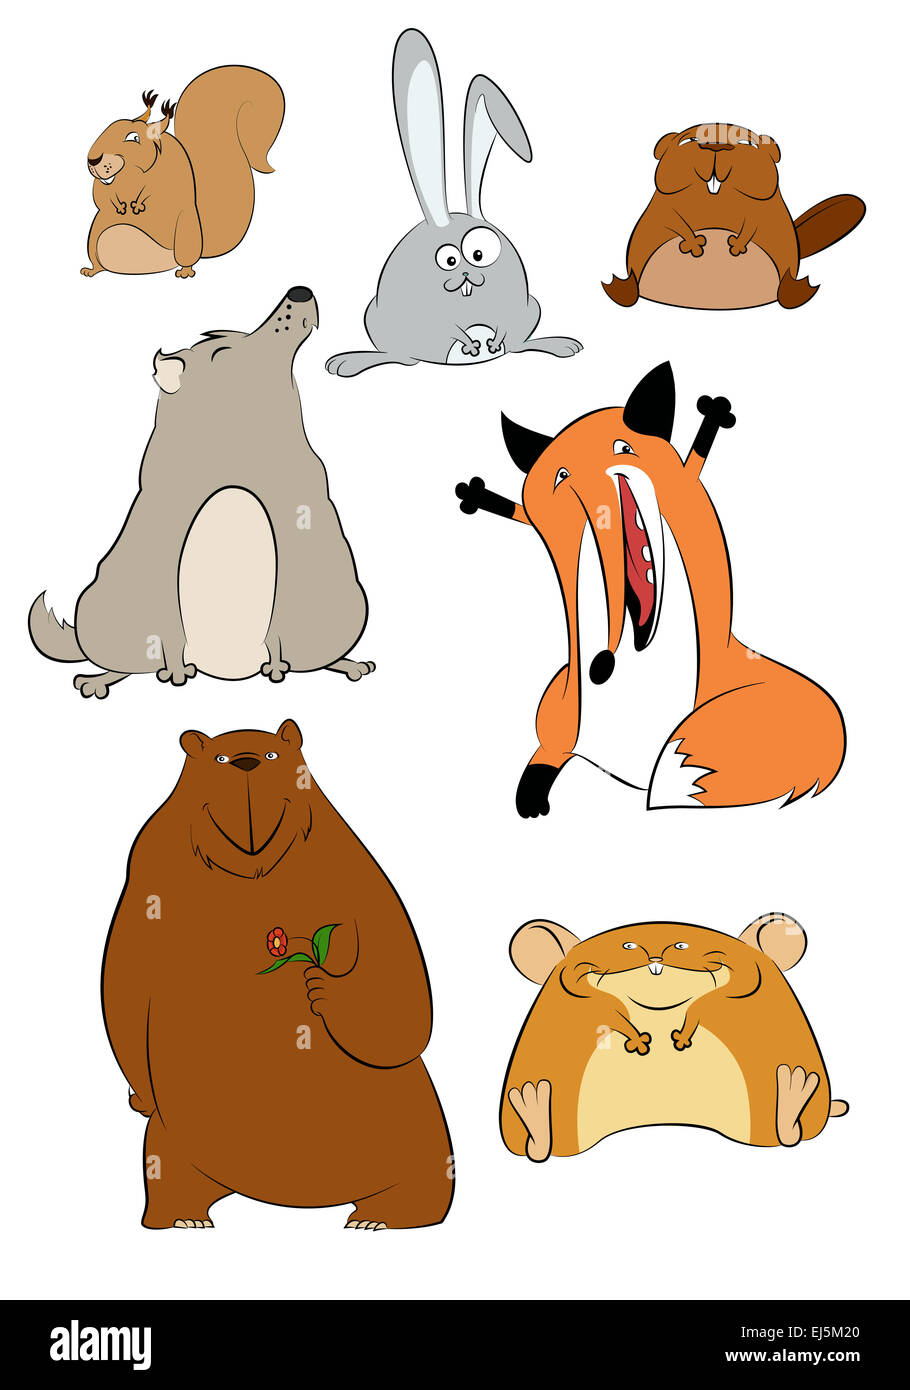 Vector image of collection of wild cartoon animals Stock Photo